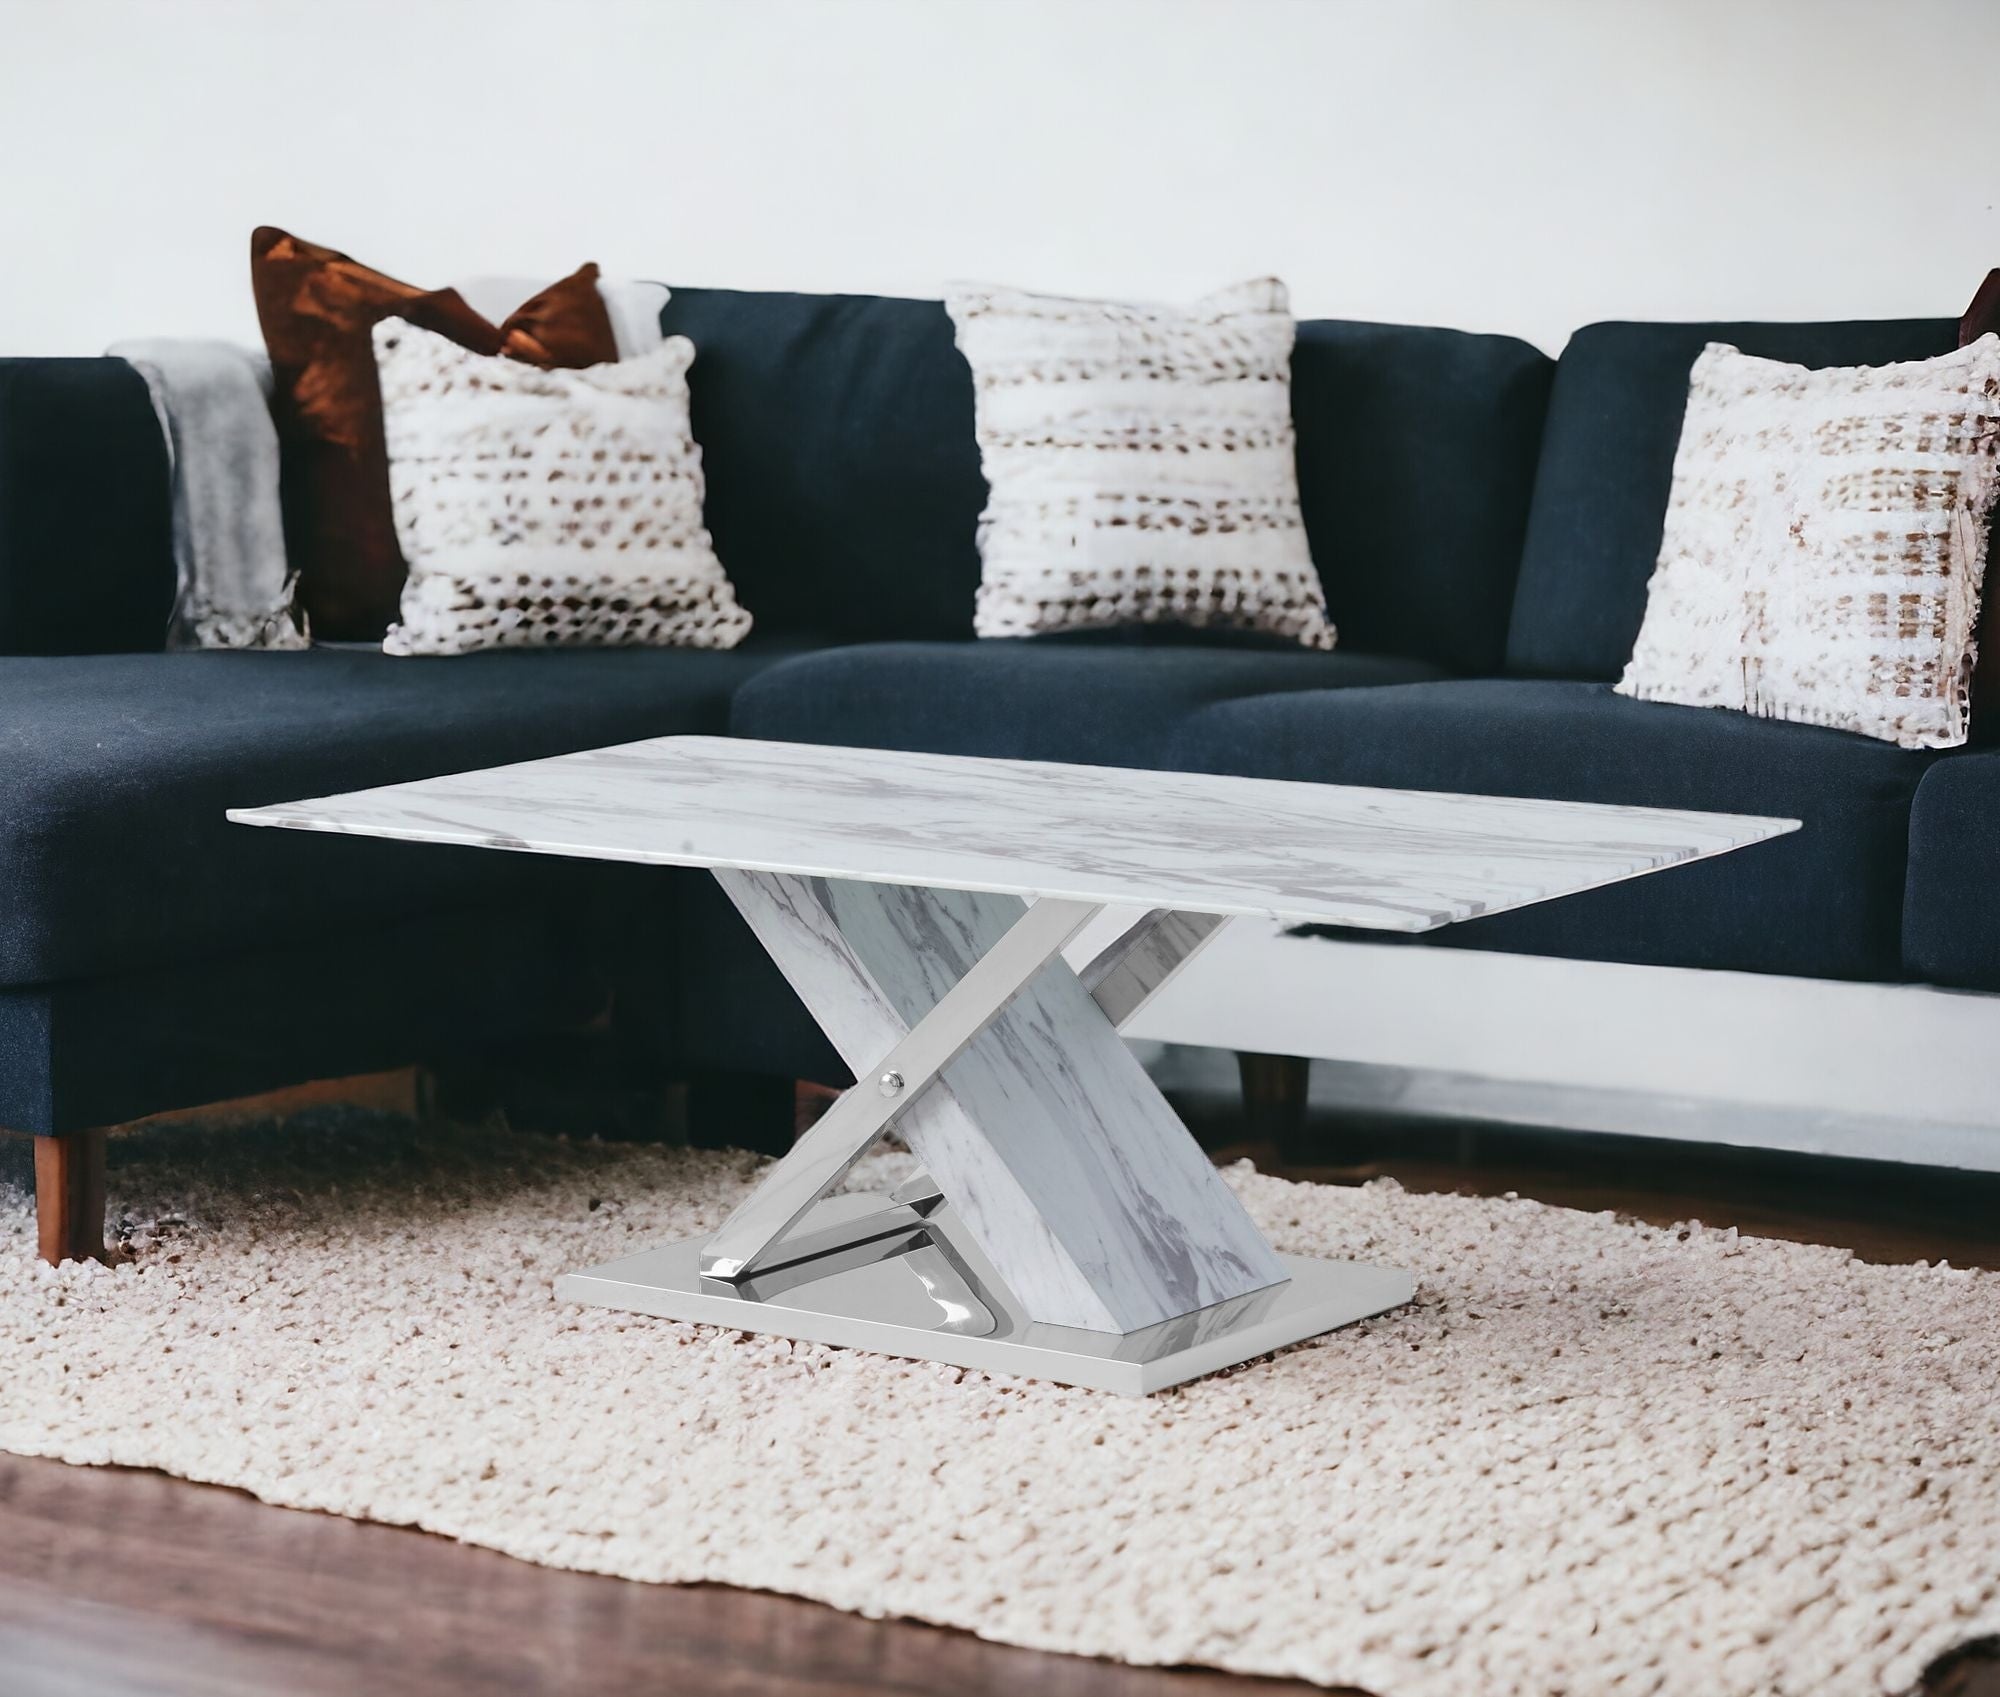 47" White And Gray Glass And Steel Coffee Table